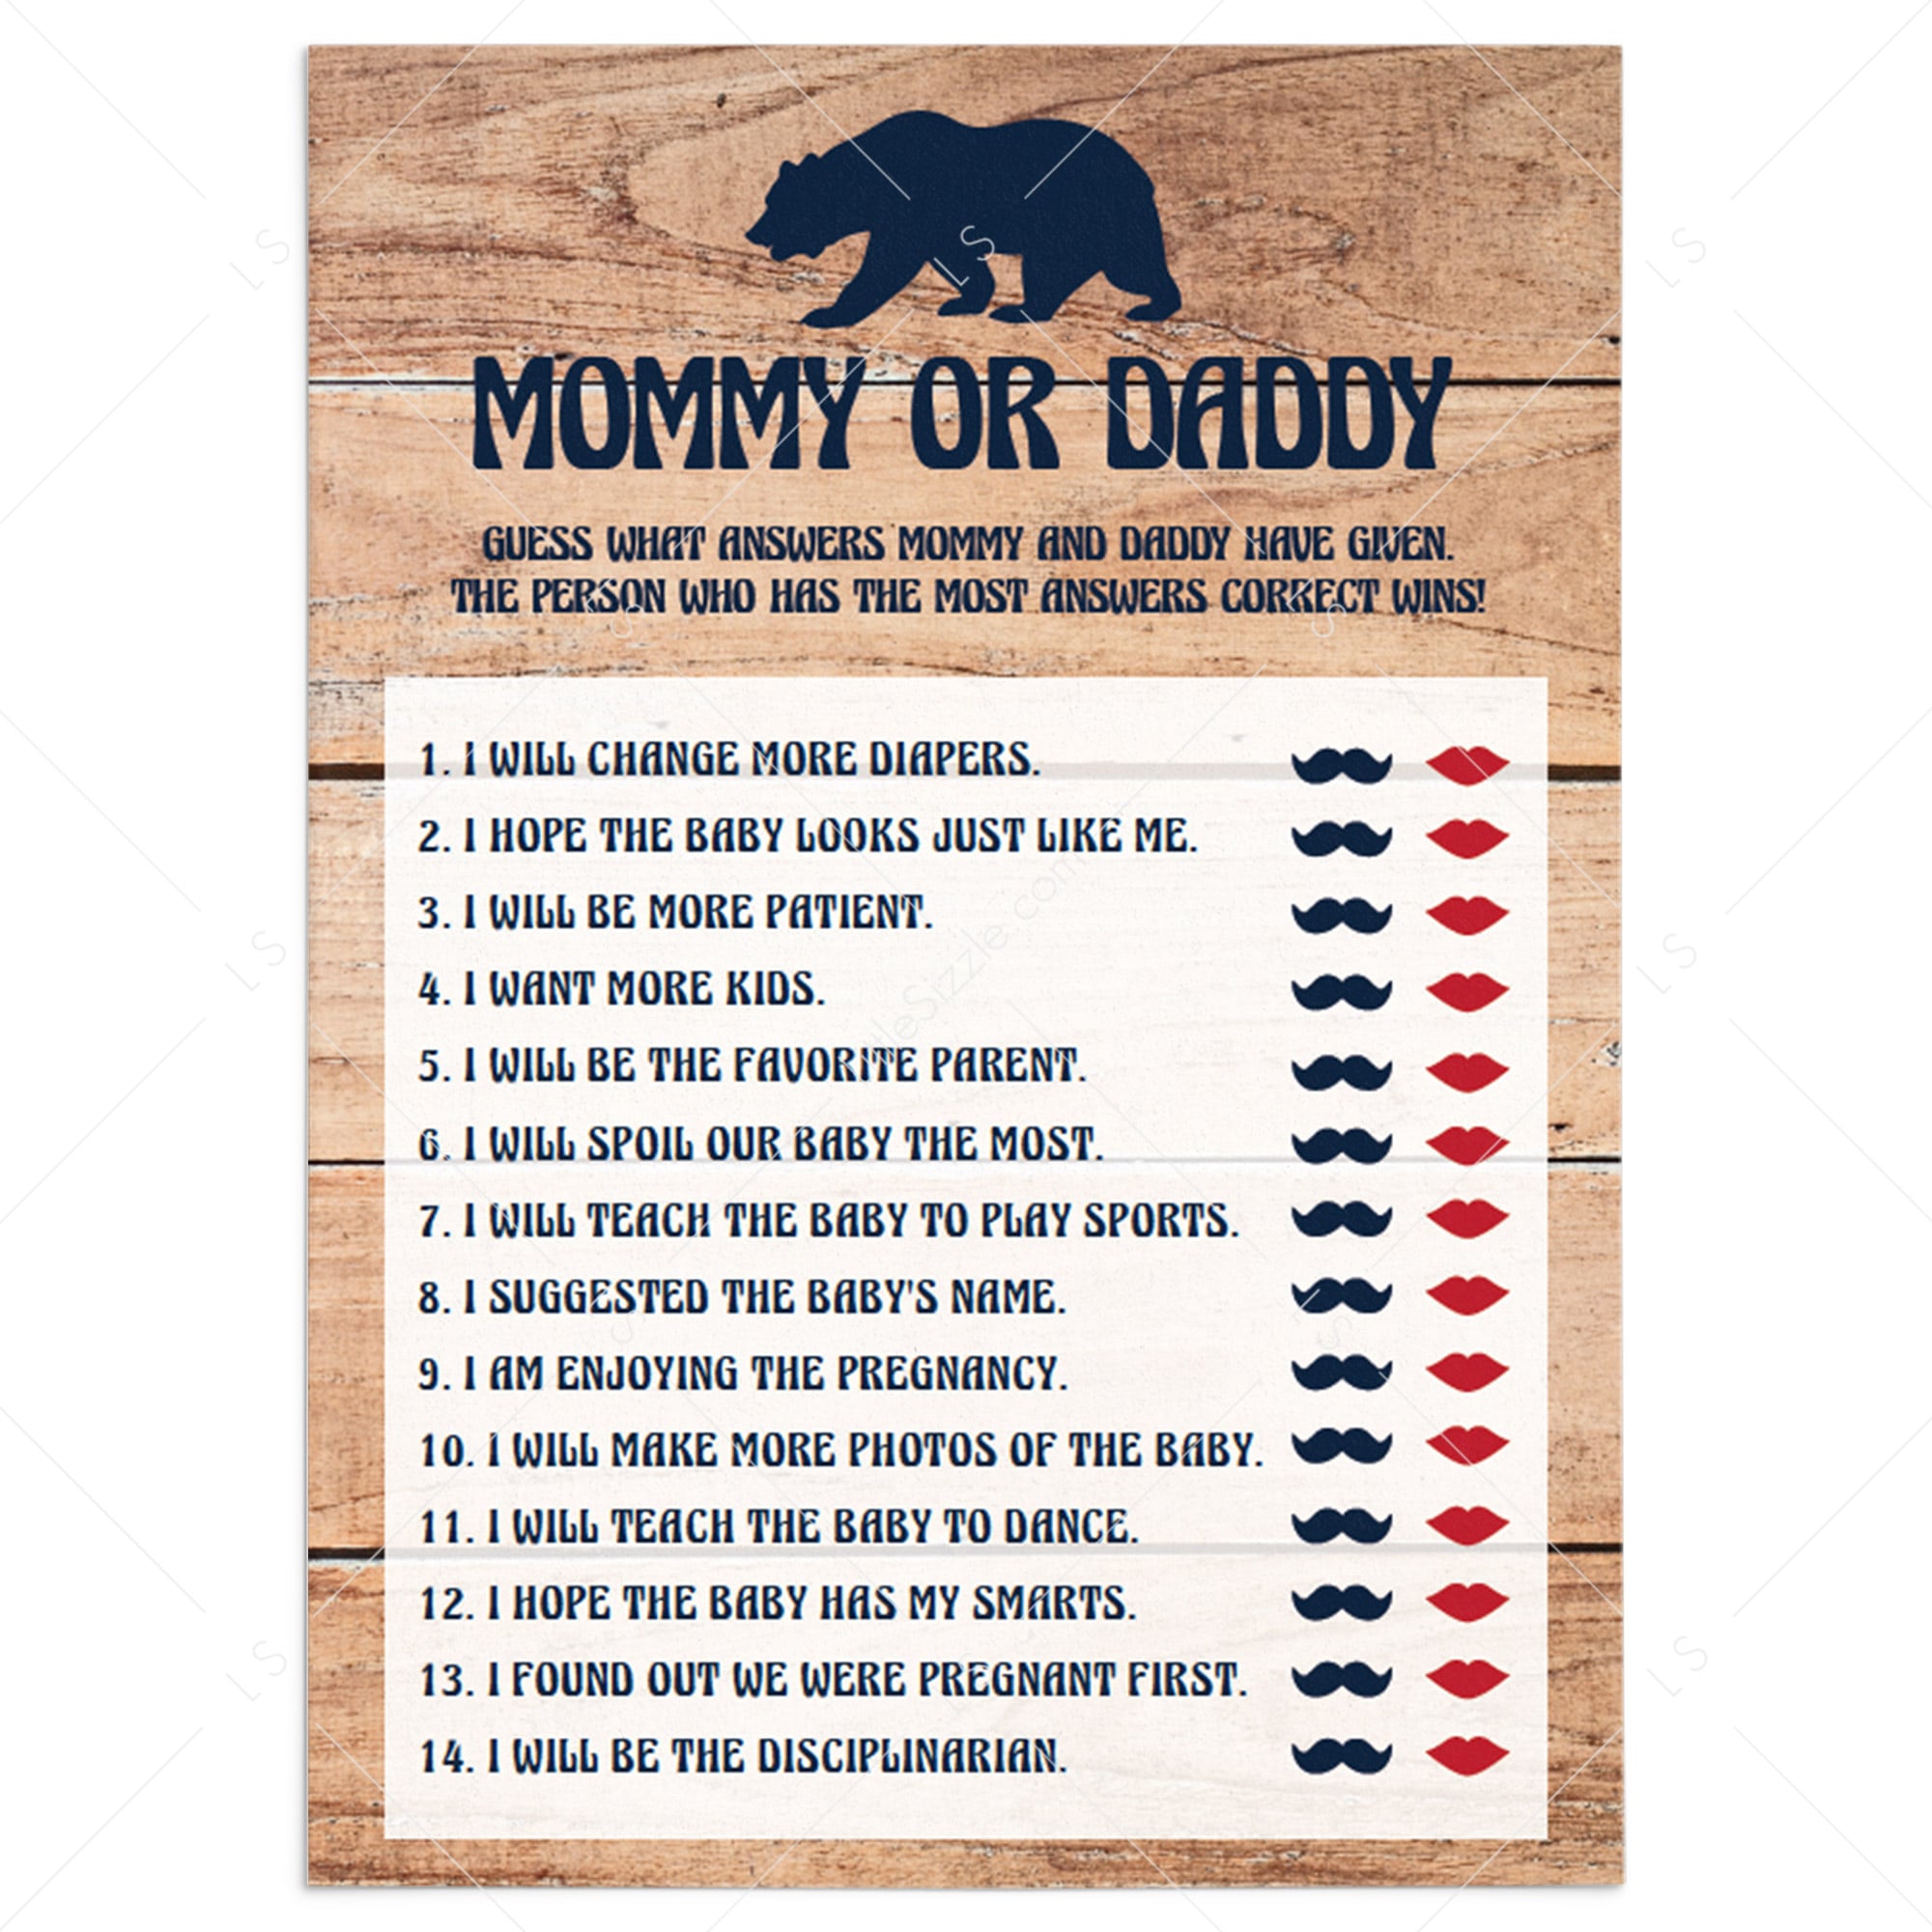 Mommy or daddy guessing game for baby shower by LittleSizzle